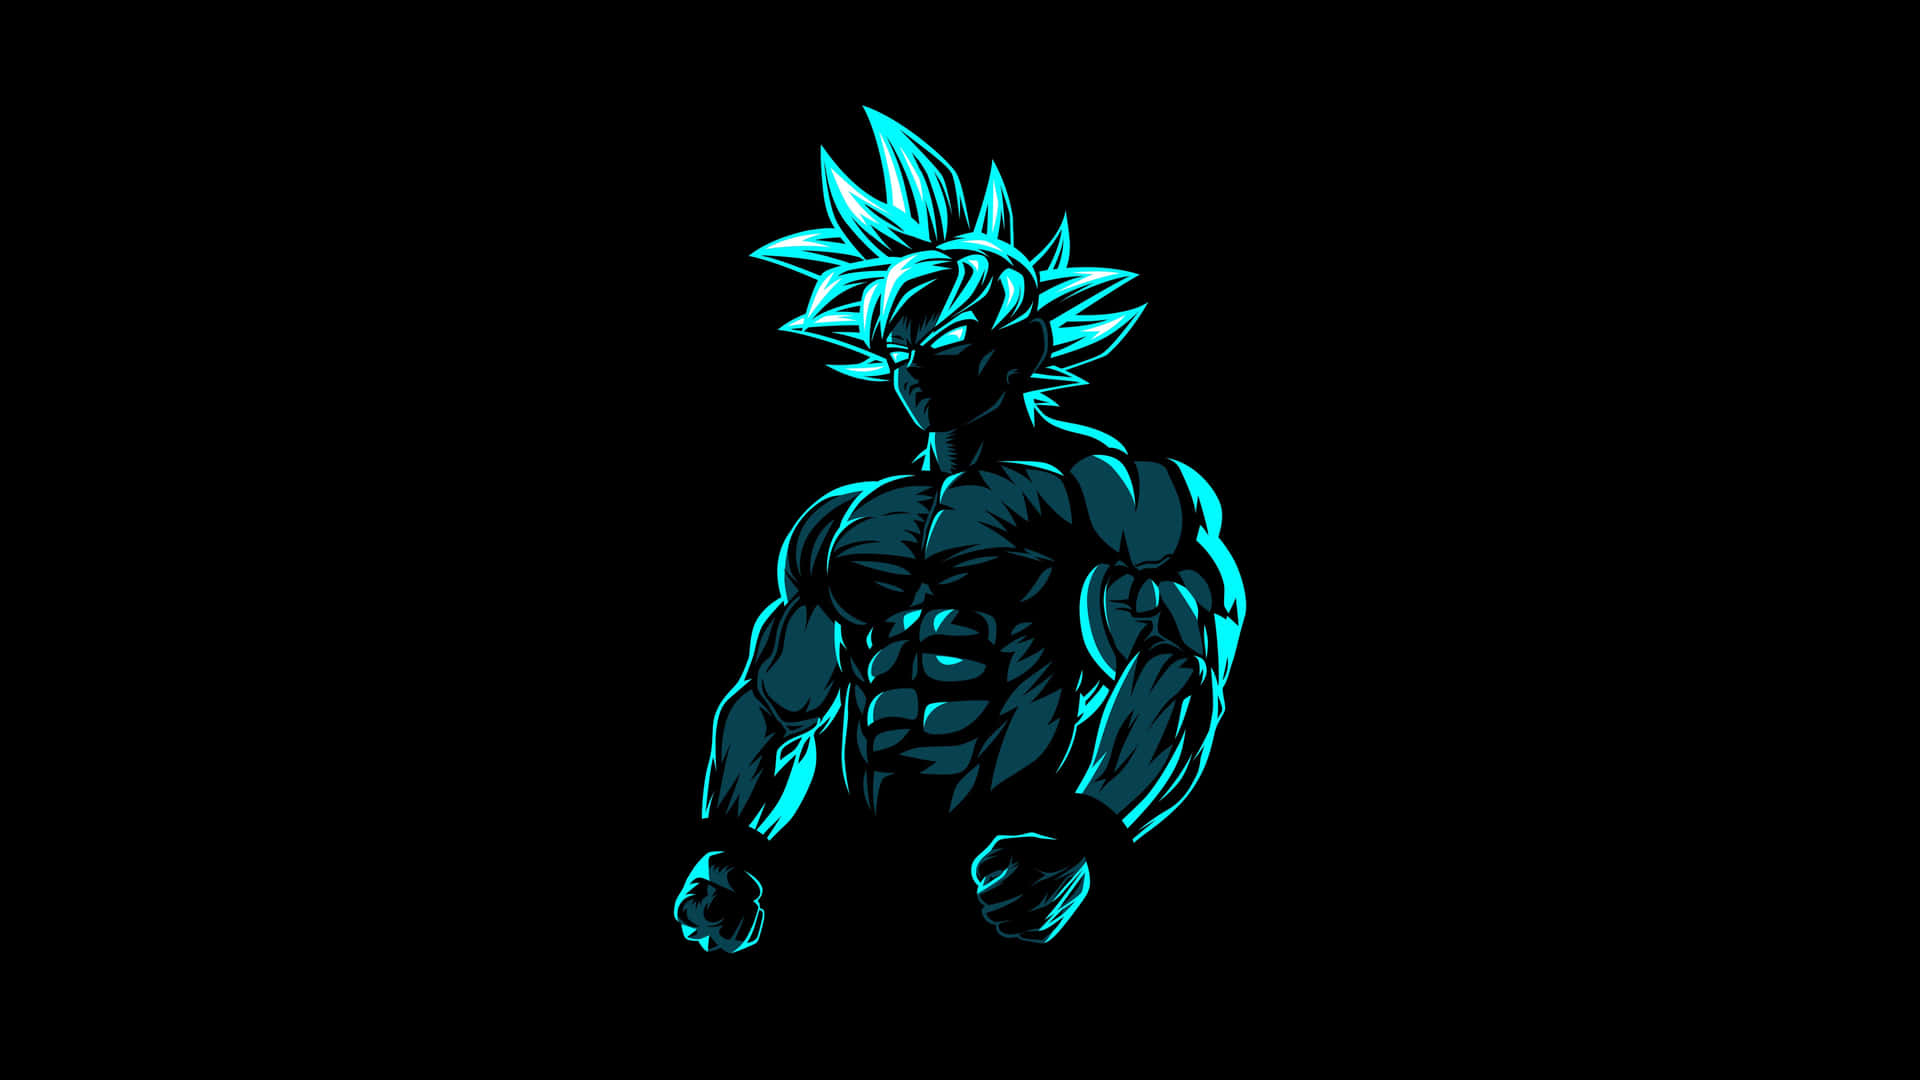 Goku Black in his Sinister Glory